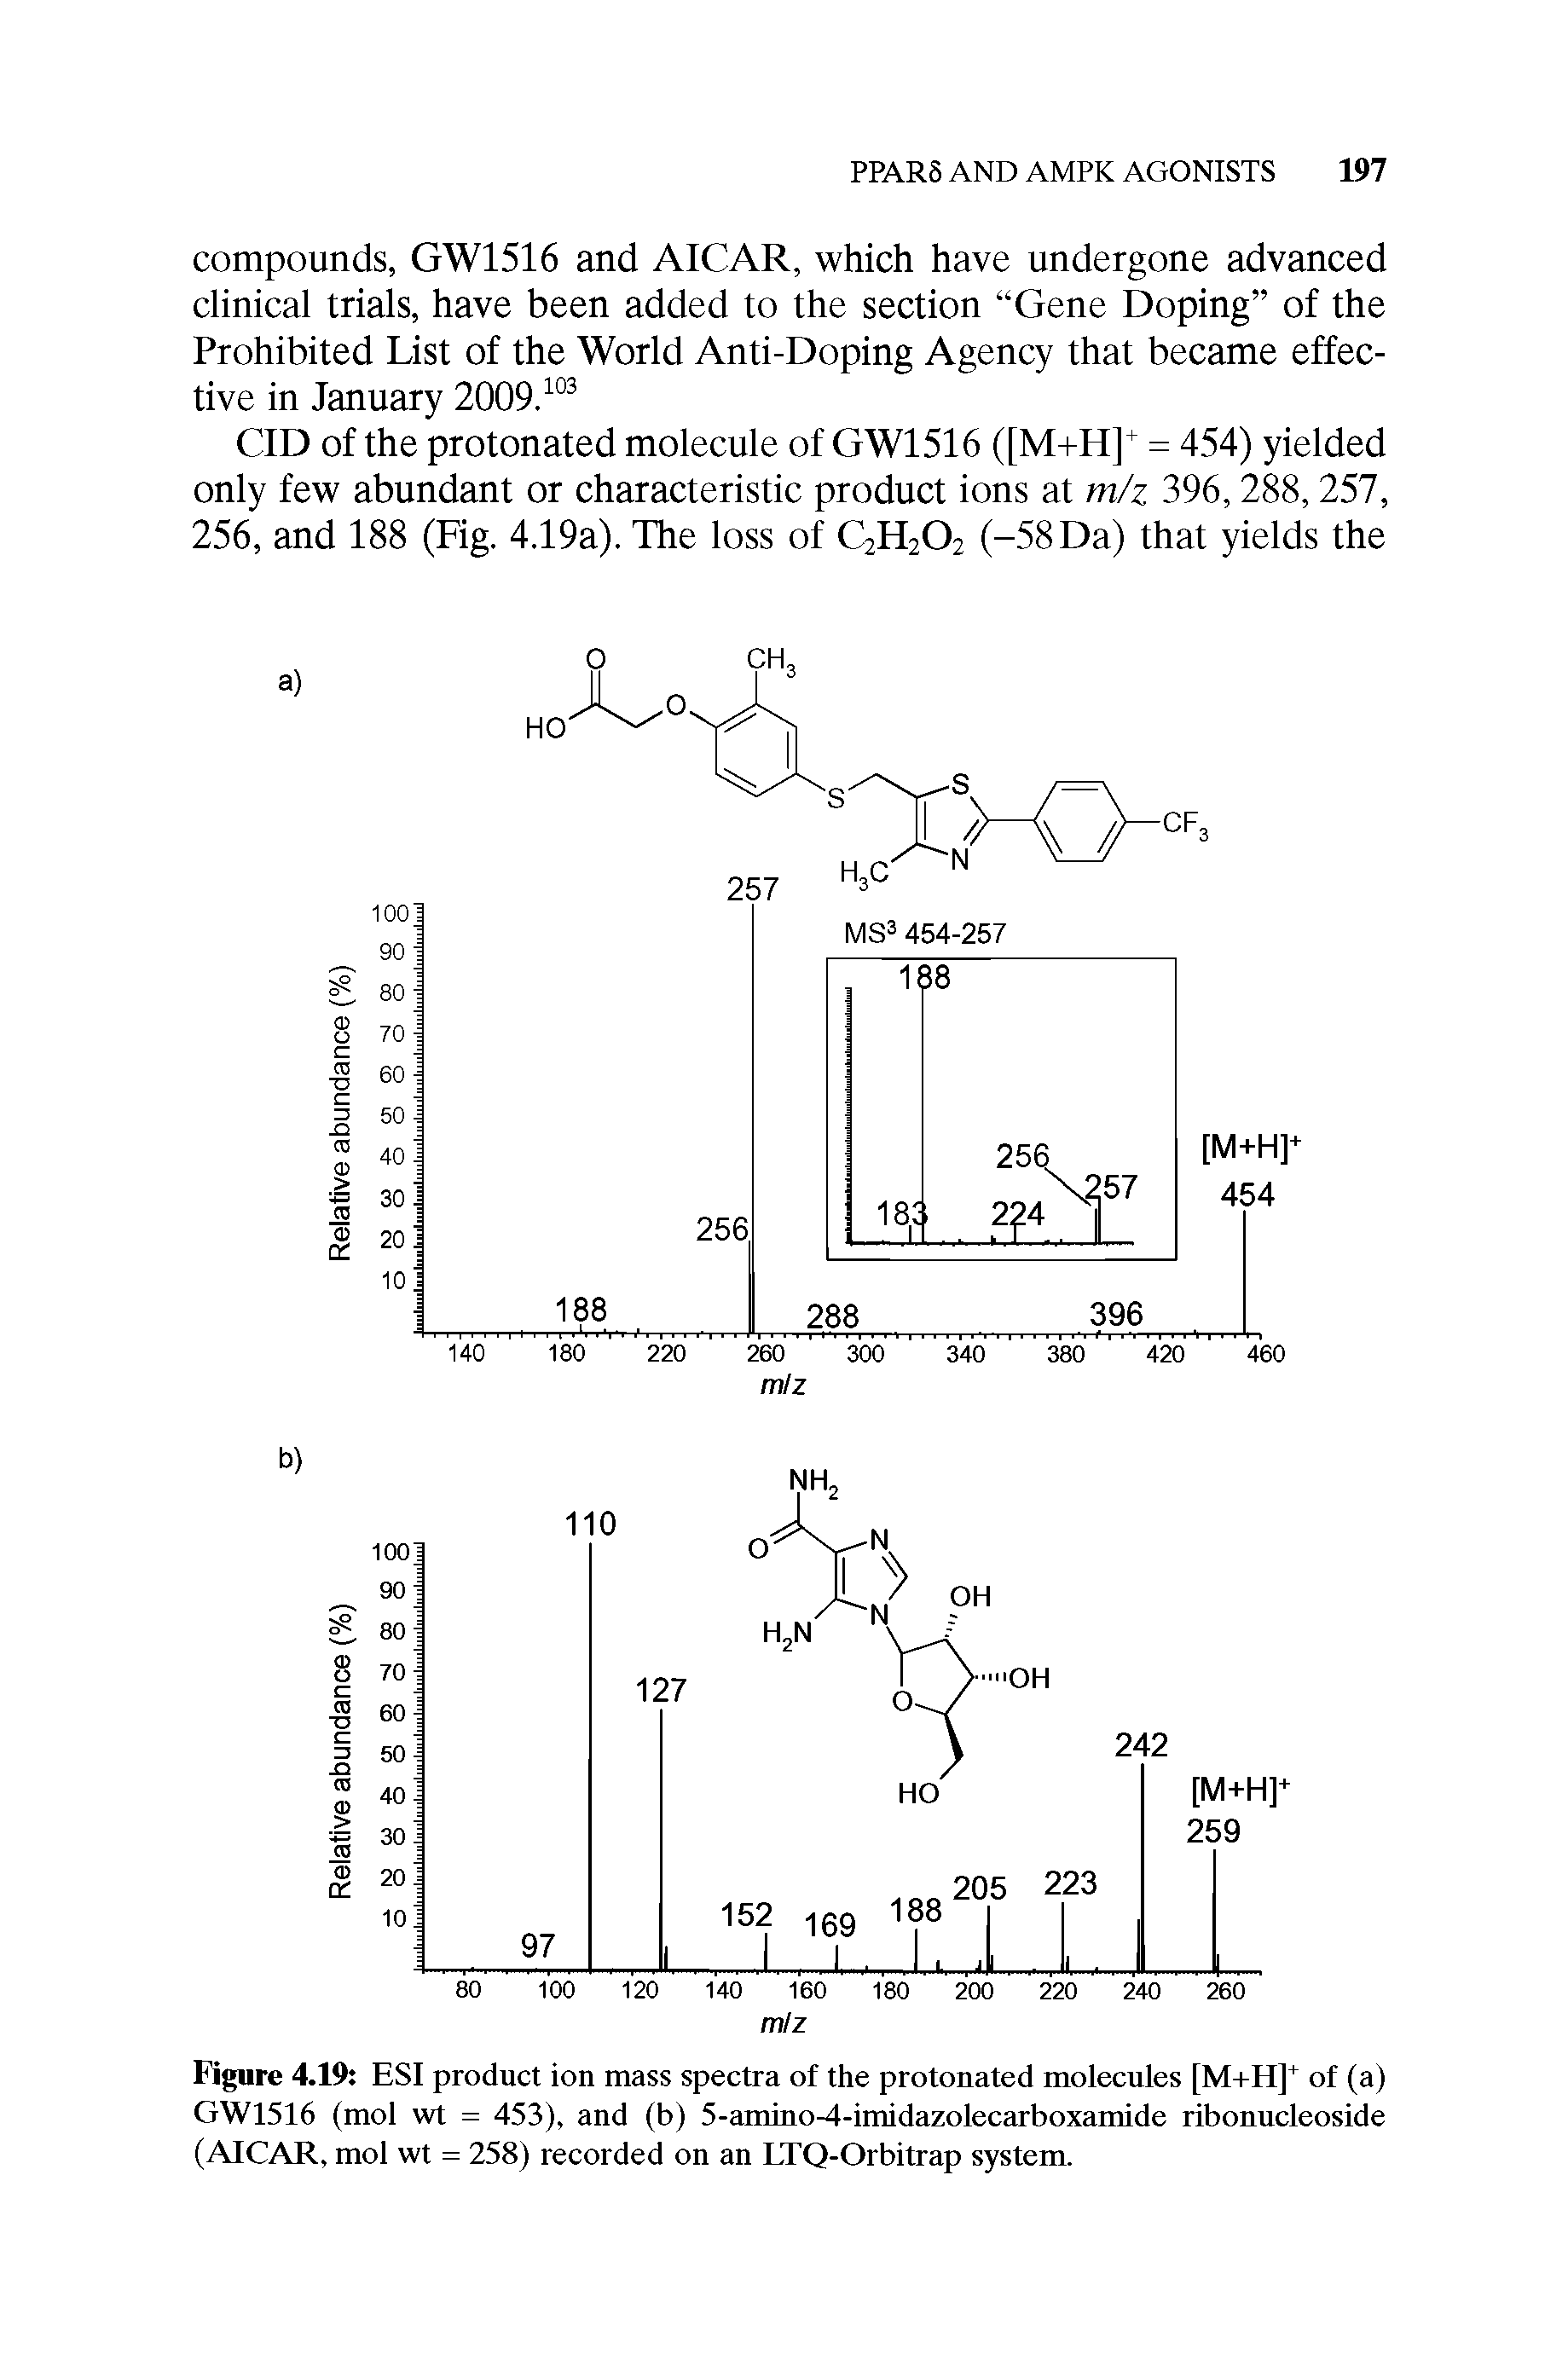 Figure 4.19 ESI product ion mass spectra of the protonated molecules [M+H]+ of (a) GW1516 (mol wt = 453), and (b) 5-amino-4-imidazolecarboxamLde ribonucleoside (AICAR, mol wt = 258) recorded on an LTQ-Orbitrap system.